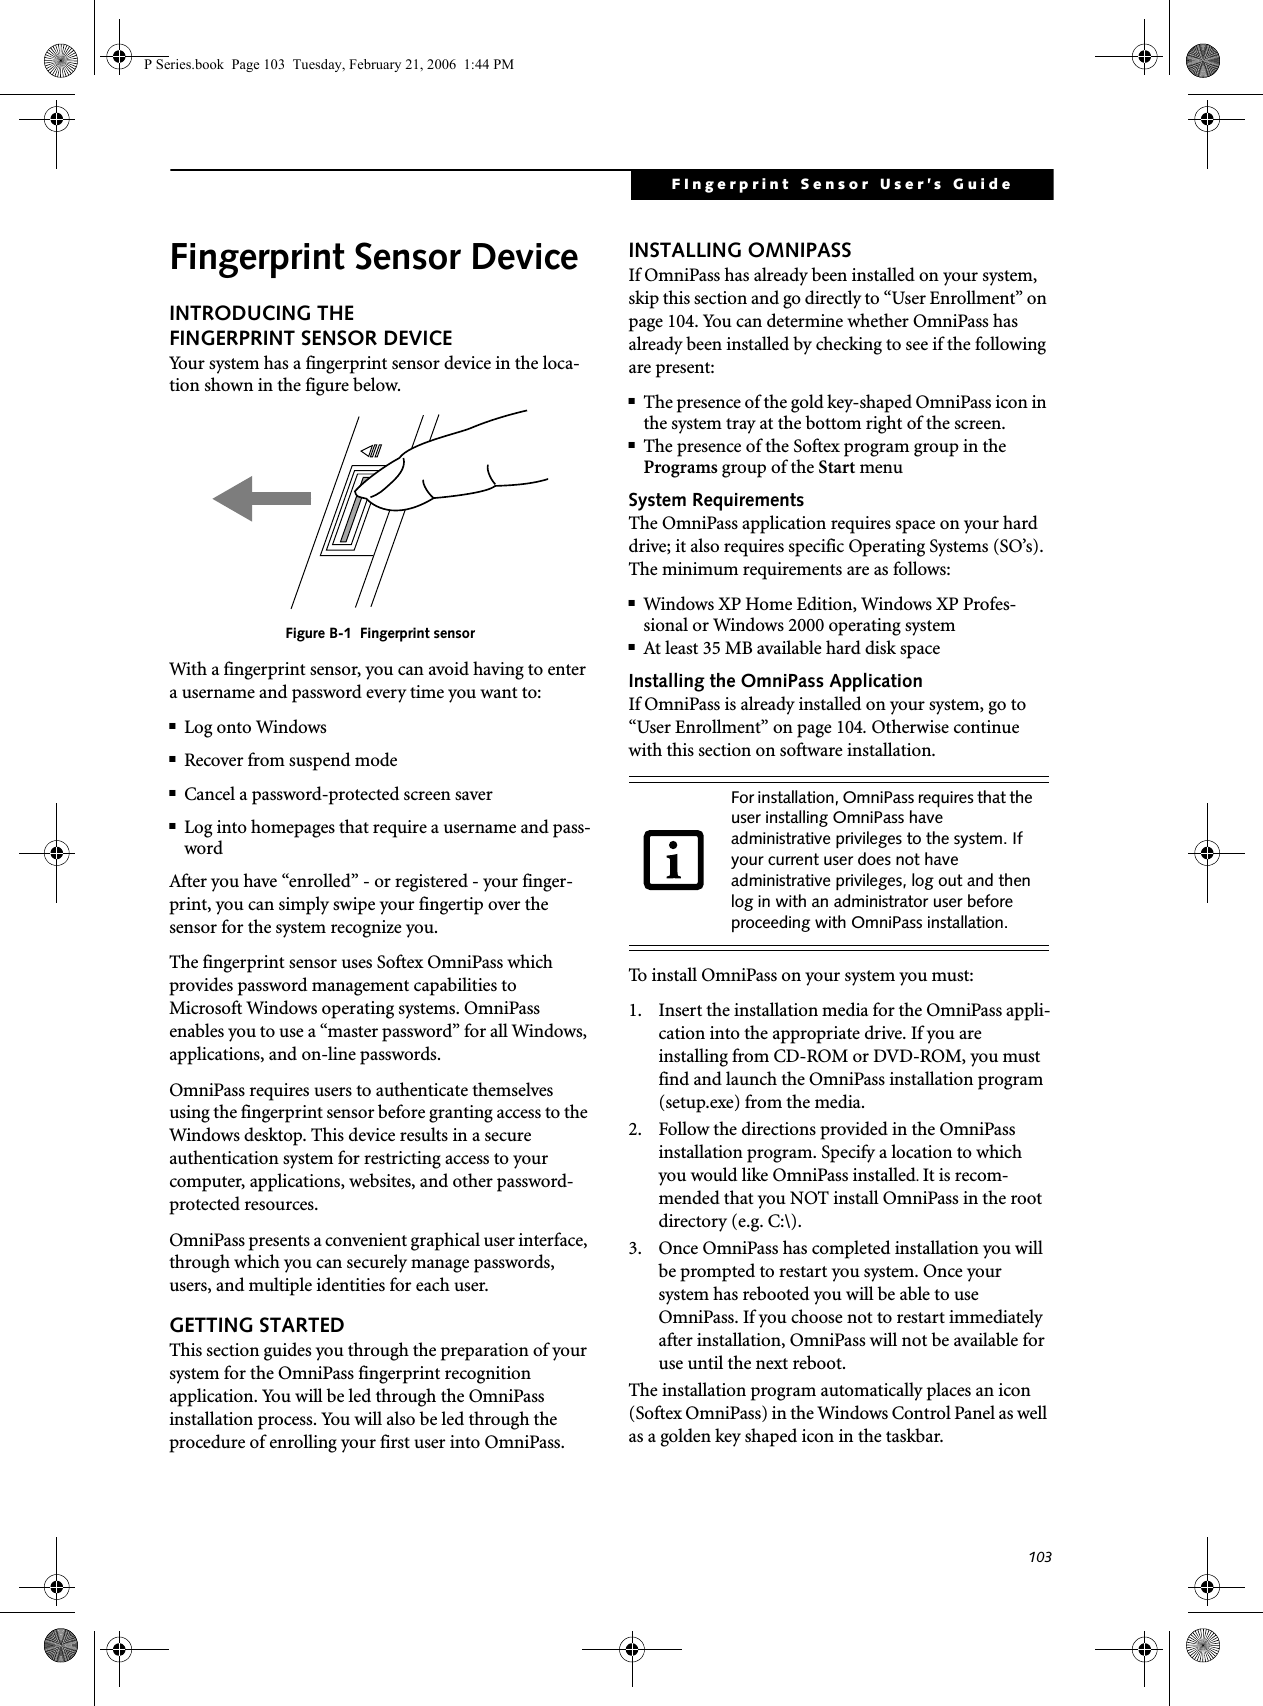 103FIngerprint Sensor User’s Guide Fingerprint Sensor DeviceINTRODUCING THE FINGERPRINT SENSOR DEVICEYour system has a fingerprint sensor device in the loca-tion shown in the figure below. Figure B-1  Fingerprint sensorWith a fingerprint sensor, you can avoid having to enter a username and password every time you want to:■Log onto Windows■Recover from suspend mode■Cancel a password-protected screen saver■Log into homepages that require a username and pass-wordAfter you have “enrolled” - or registered - your finger-print, you can simply swipe your fingertip over the sensor for the system recognize you. The fingerprint sensor uses Softex OmniPass which provides password management capabilities to Microsoft Windows operating systems. OmniPass enables you to use a “master password” for all Windows, applications, and on-line passwords. OmniPass requires users to authenticate themselves using the fingerprint sensor before granting access to the Windows desktop. This device results in a secure authentication system for restricting access to your computer, applications, websites, and other password-protected resources.OmniPass presents a convenient graphical user interface, through which you can securely manage passwords, users, and multiple identities for each user.GETTING STARTEDThis section guides you through the preparation of your system for the OmniPass fingerprint recognition application. You will be led through the OmniPass installation process. You will also be led through the procedure of enrolling your first user into OmniPass. INSTALLING OMNIPASSIf OmniPass has already been installed on your system, skip this section and go directly to “User Enrollment” on page 104. You can determine whether OmniPass has already been installed by checking to see if the following are present:■The presence of the gold key-shaped OmniPass icon in the system tray at the bottom right of the screen.■The presence of the Softex program group in the Programs group of the Start menuSystem RequirementsThe OmniPass application requires space on your hard drive; it also requires specific Operating Systems (SO’s). The minimum requirements are as follows:■Windows XP Home Edition, Windows XP Profes-sional or Windows 2000 operating system■At least 35 MB available hard disk spaceInstalling the OmniPass ApplicationIf OmniPass is already installed on your system, go to “User Enrollment” on page 104. Otherwise continue with this section on software installation.To install OmniPass on your system you must:1.  Insert the installation media for the OmniPass appli-cation into the appropriate drive. If you are installing from CD-ROM or DVD-ROM, you must find and launch the OmniPass installation program (setup.exe) from the media.2.  Follow the directions provided in the OmniPass installation program. Specify a location to which you would like OmniPass installed. It is recom-mended that you NOT install OmniPass in the root directory (e.g. C:\). 3.  Once OmniPass has completed installation you will be prompted to restart you system. Once your system has rebooted you will be able to use OmniPass. If you choose not to restart immediately after installation, OmniPass will not be available for use until the next reboot.The installation program automatically places an icon (Softex OmniPass) in the Windows Control Panel as well as a golden key shaped icon in the taskbar. For installation, OmniPass requires that the user installing OmniPass have administrative privileges to the system. If your current user does not have administrative privileges, log out and then log in with an administrator user before proceeding with OmniPass installation.P Series.book  Page 103  Tuesday, February 21, 2006  1:44 PM